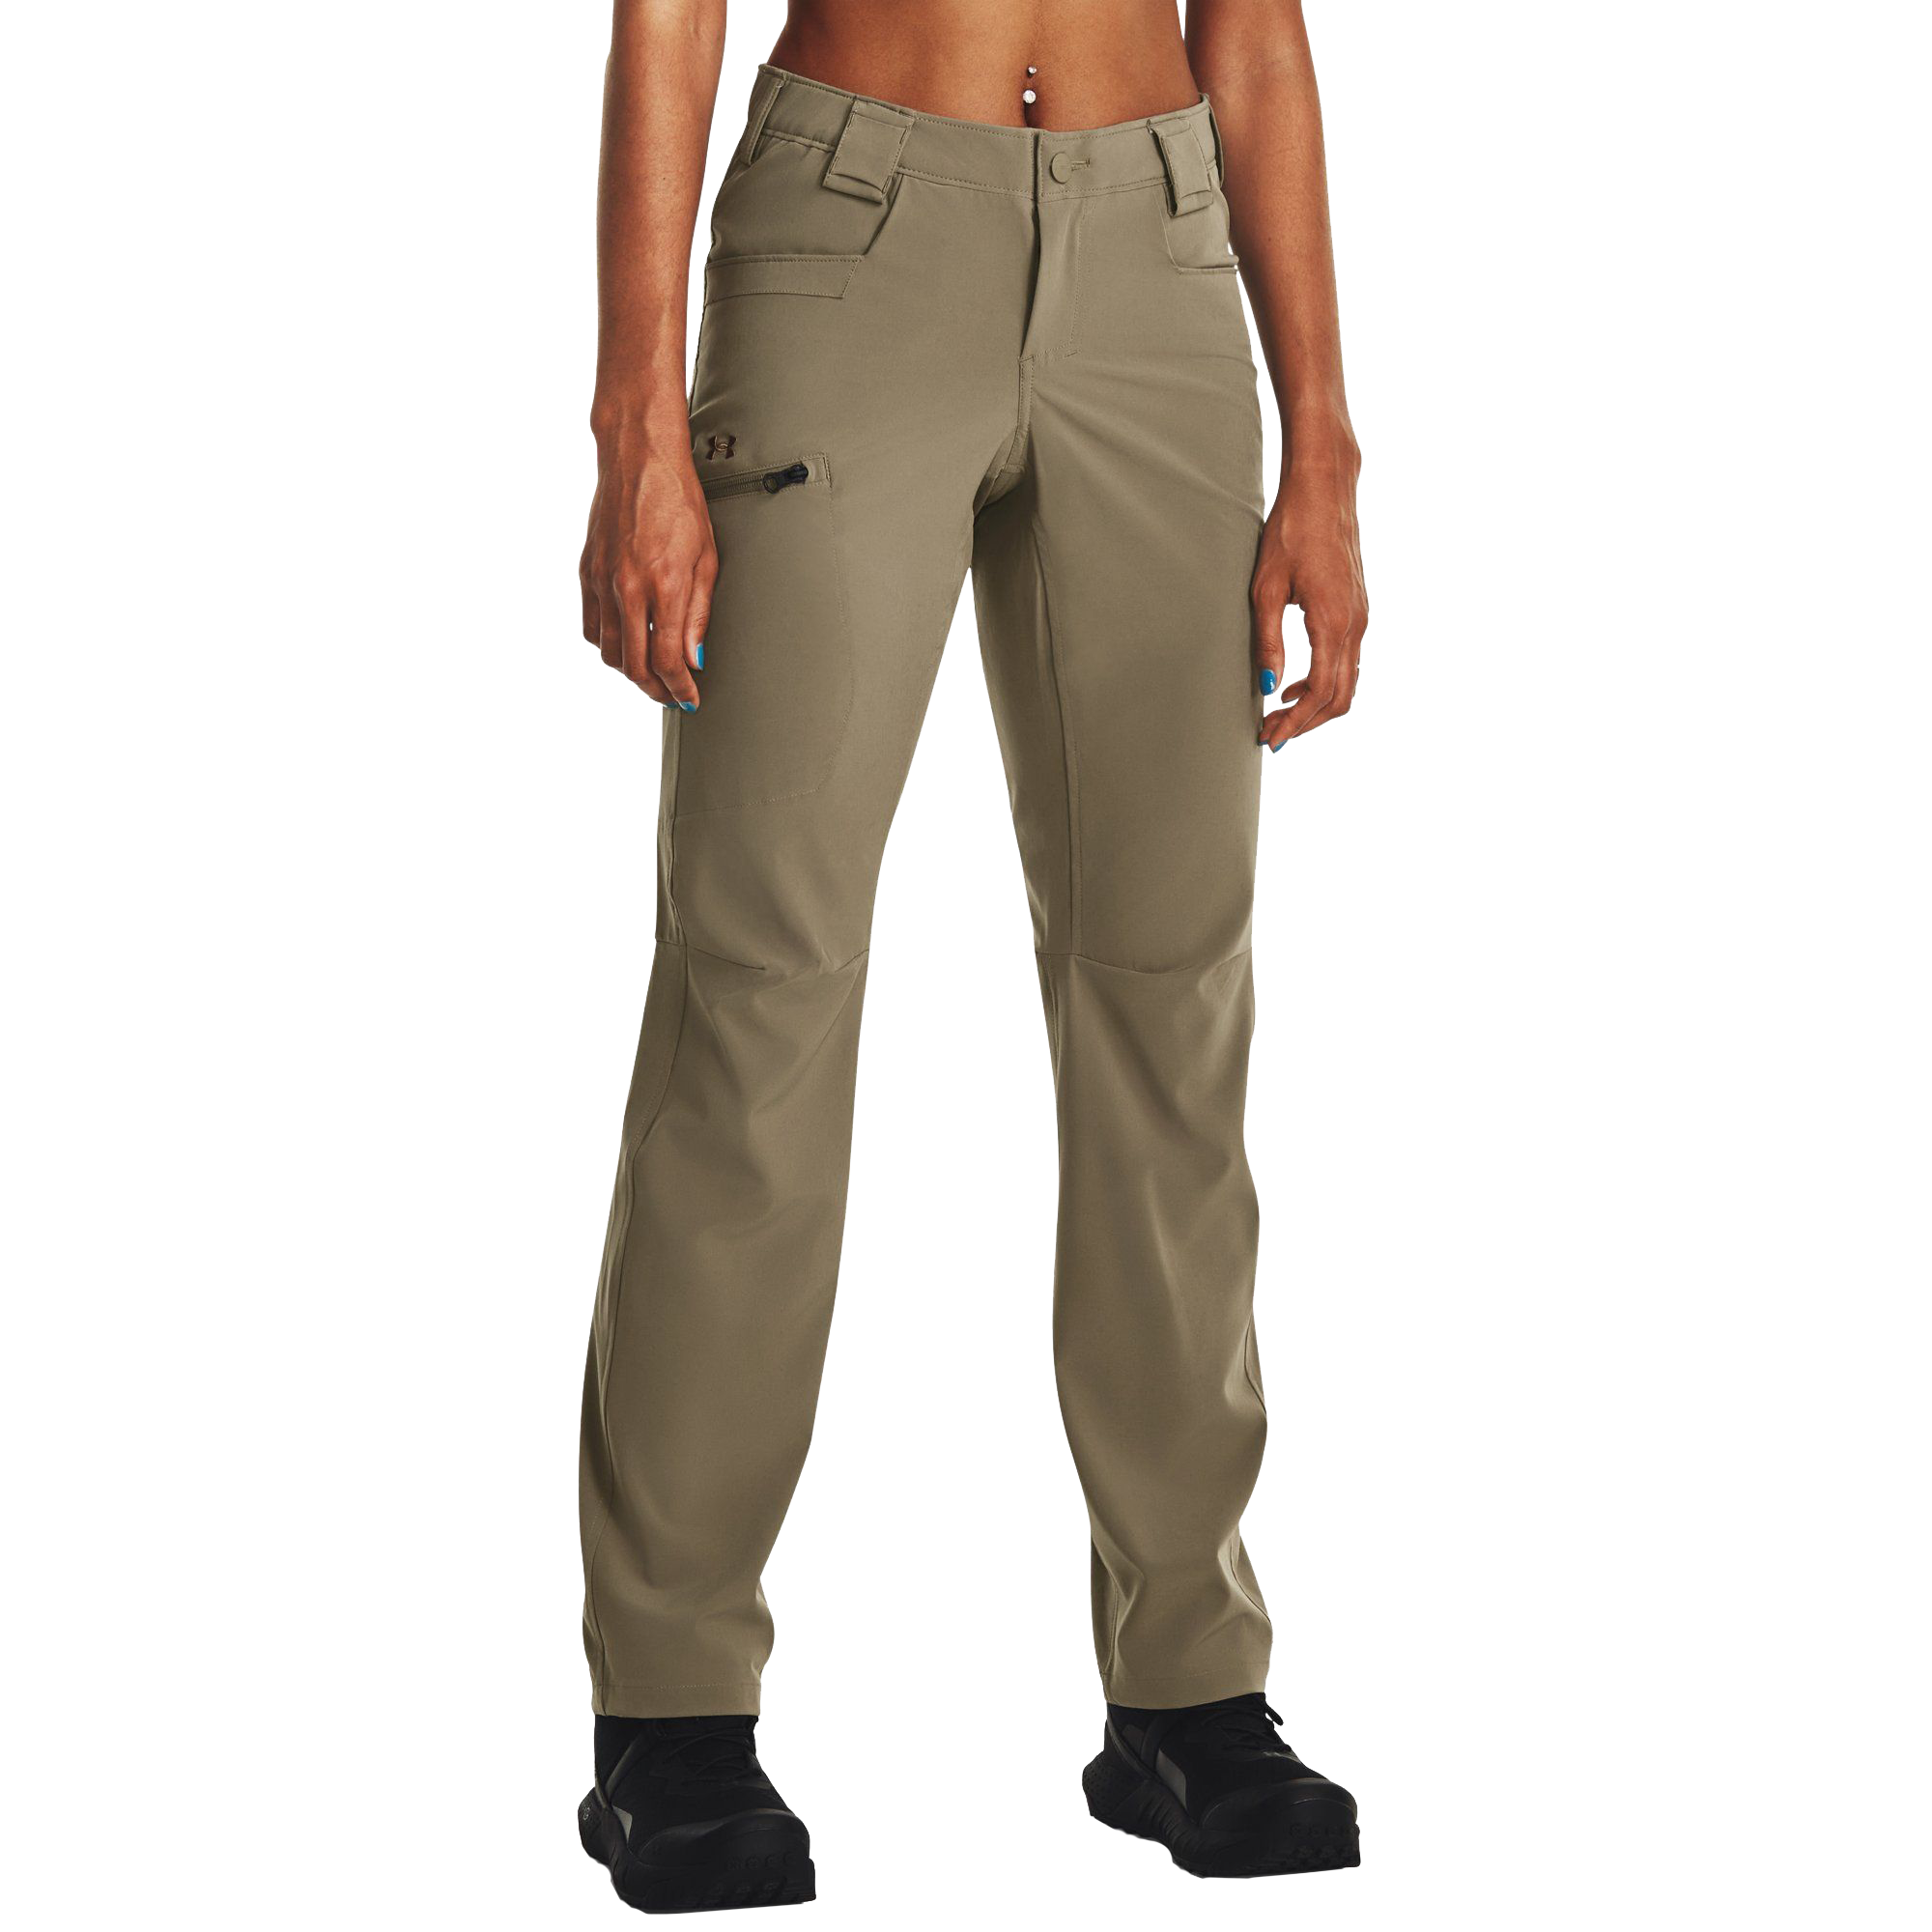 Under Armour Defender Pants for Ladies